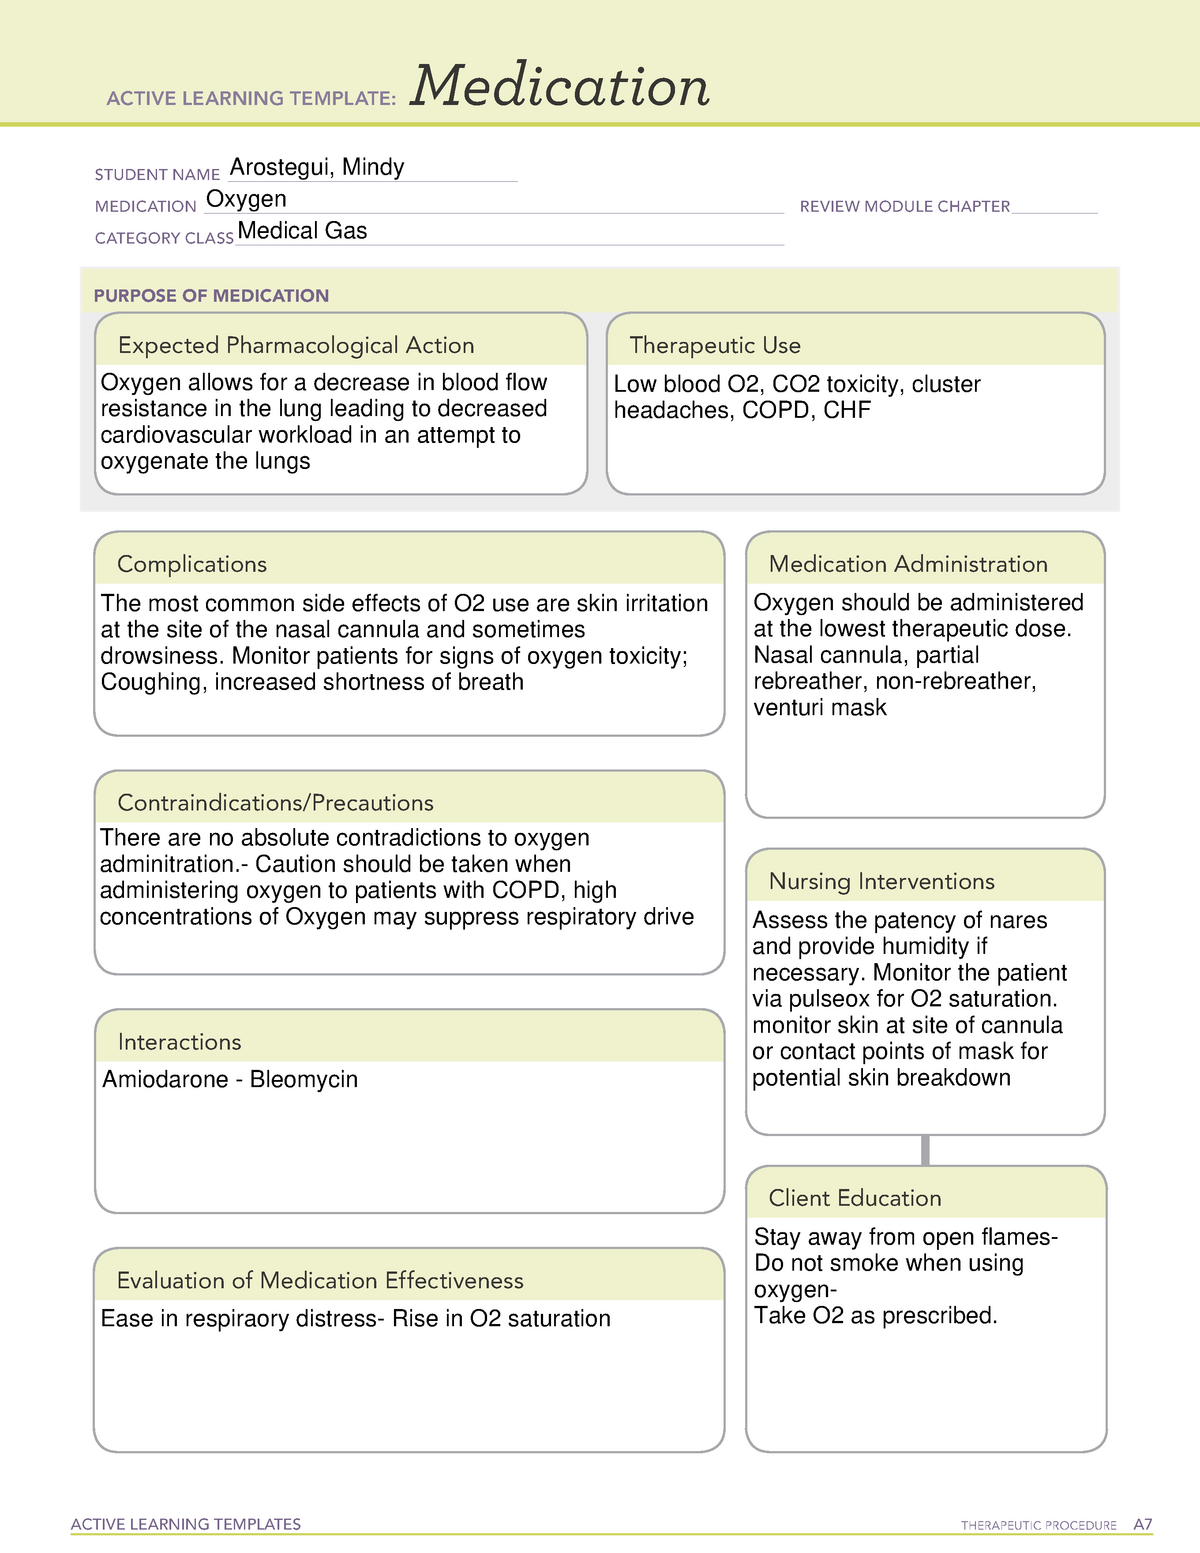 oxygen-ati-med-card-active-learning-templates-therapeutic-procedure